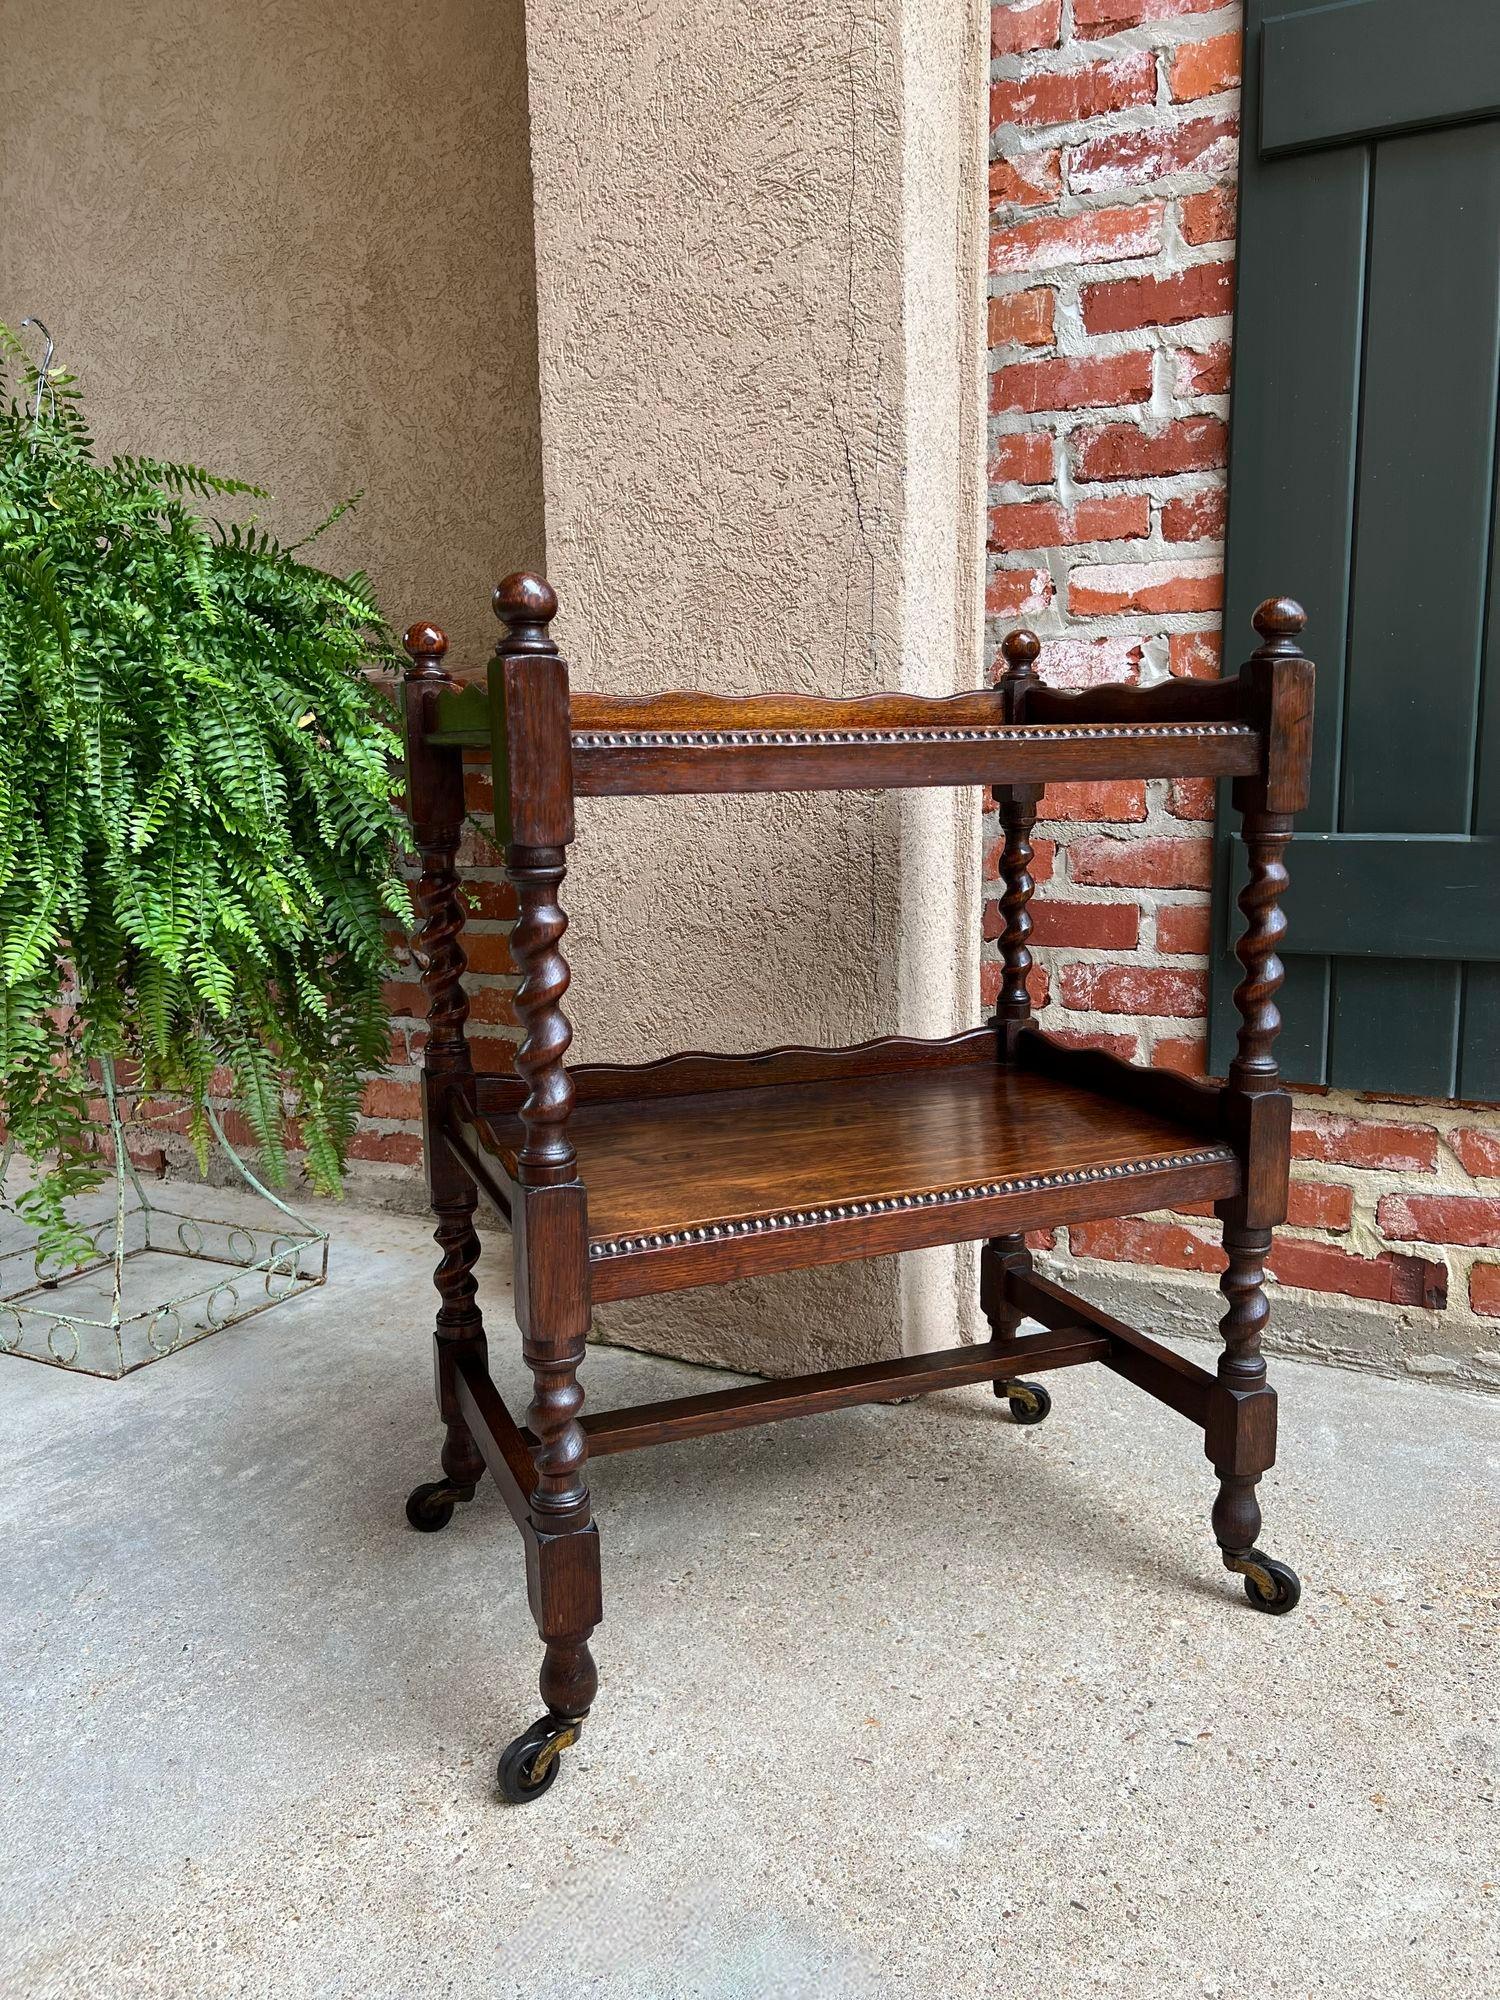 Antique English Tea Trolley Drinks Cart Tiger Oak Barley Twist Cocktail Table.

Direct from England, a beautiful antique English oak tea trolley or “dumbwaiter” drinks serving cart. Excellent for entertaining, as a drinks or dessert cart, and